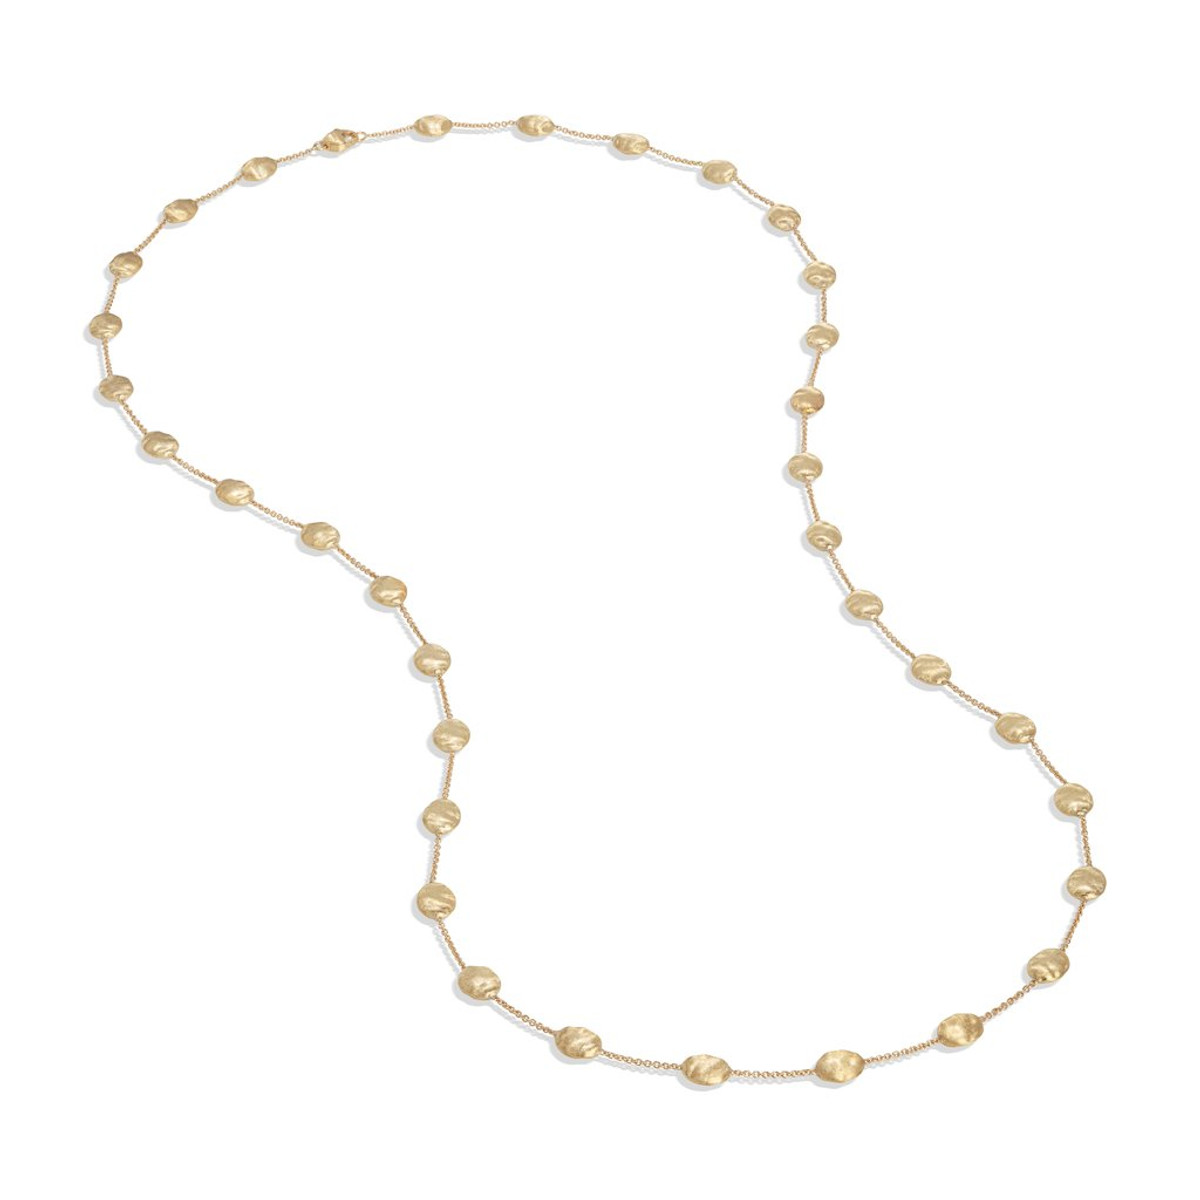 Marco Bicego 18K Yellow Gold Siviglia 36in Necklace-34643 Product Image